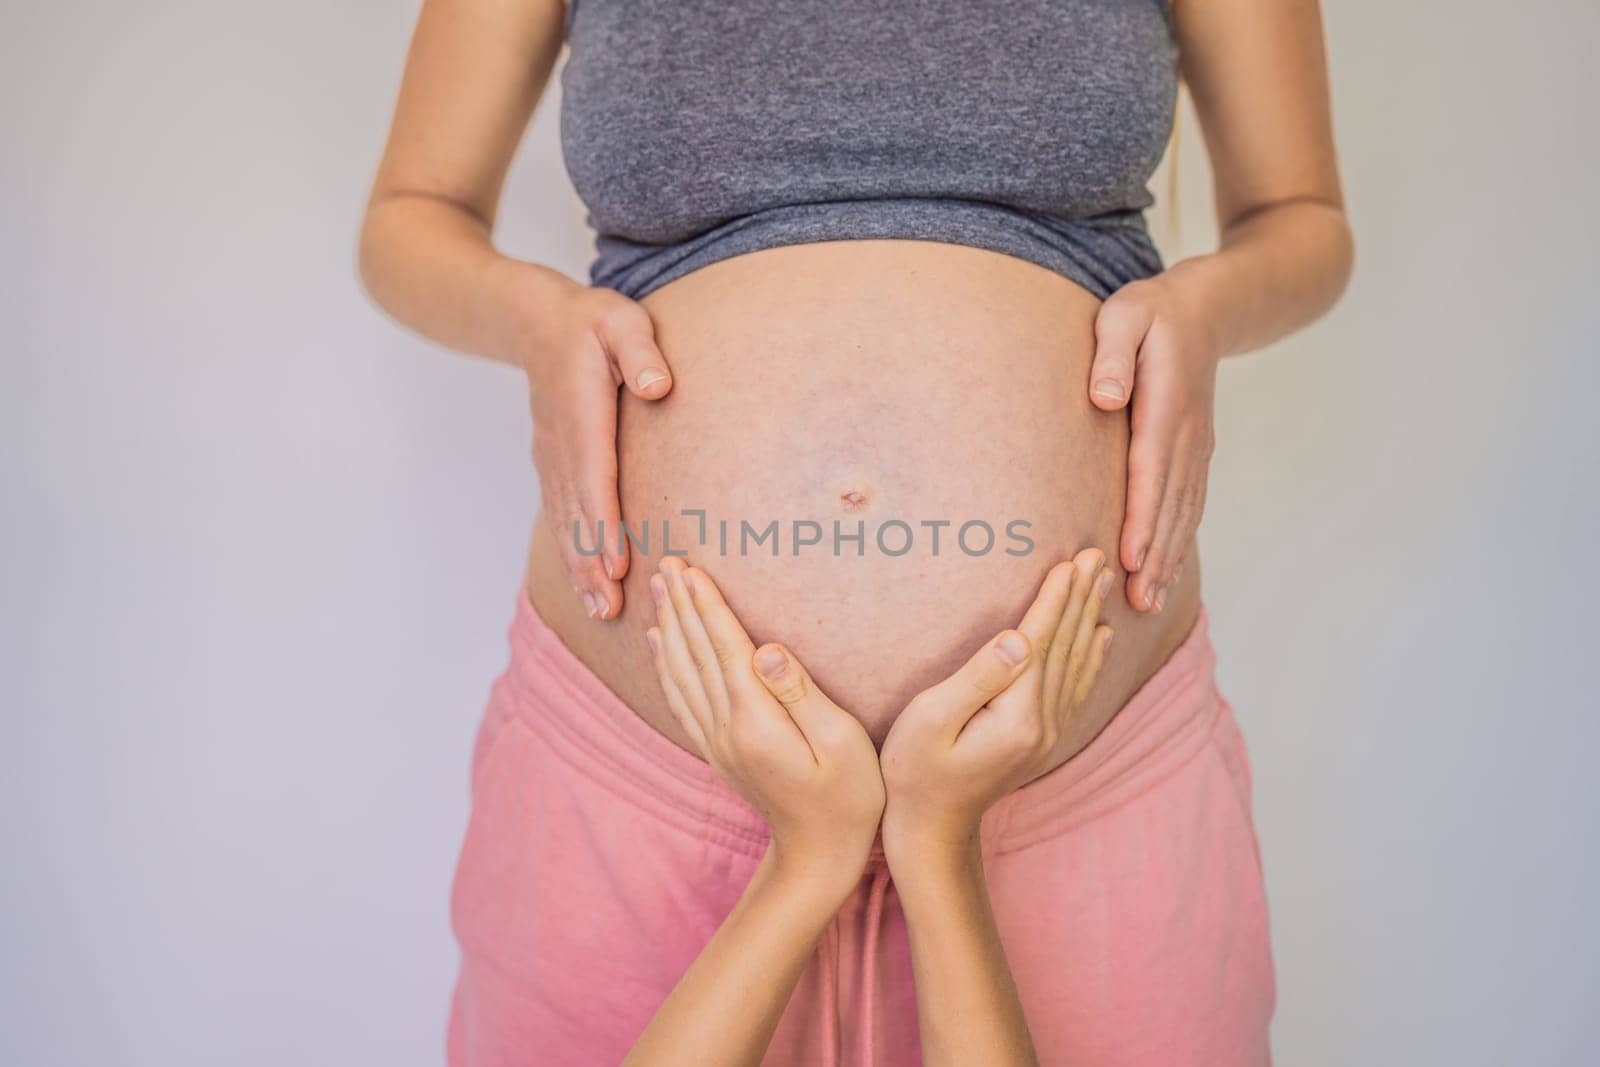 Young beautiful pregnant woman and eldest son. The cute boy put his hands on his mother's belly. Expecting a baby in the family concept. Preparing an older child for a younger one.